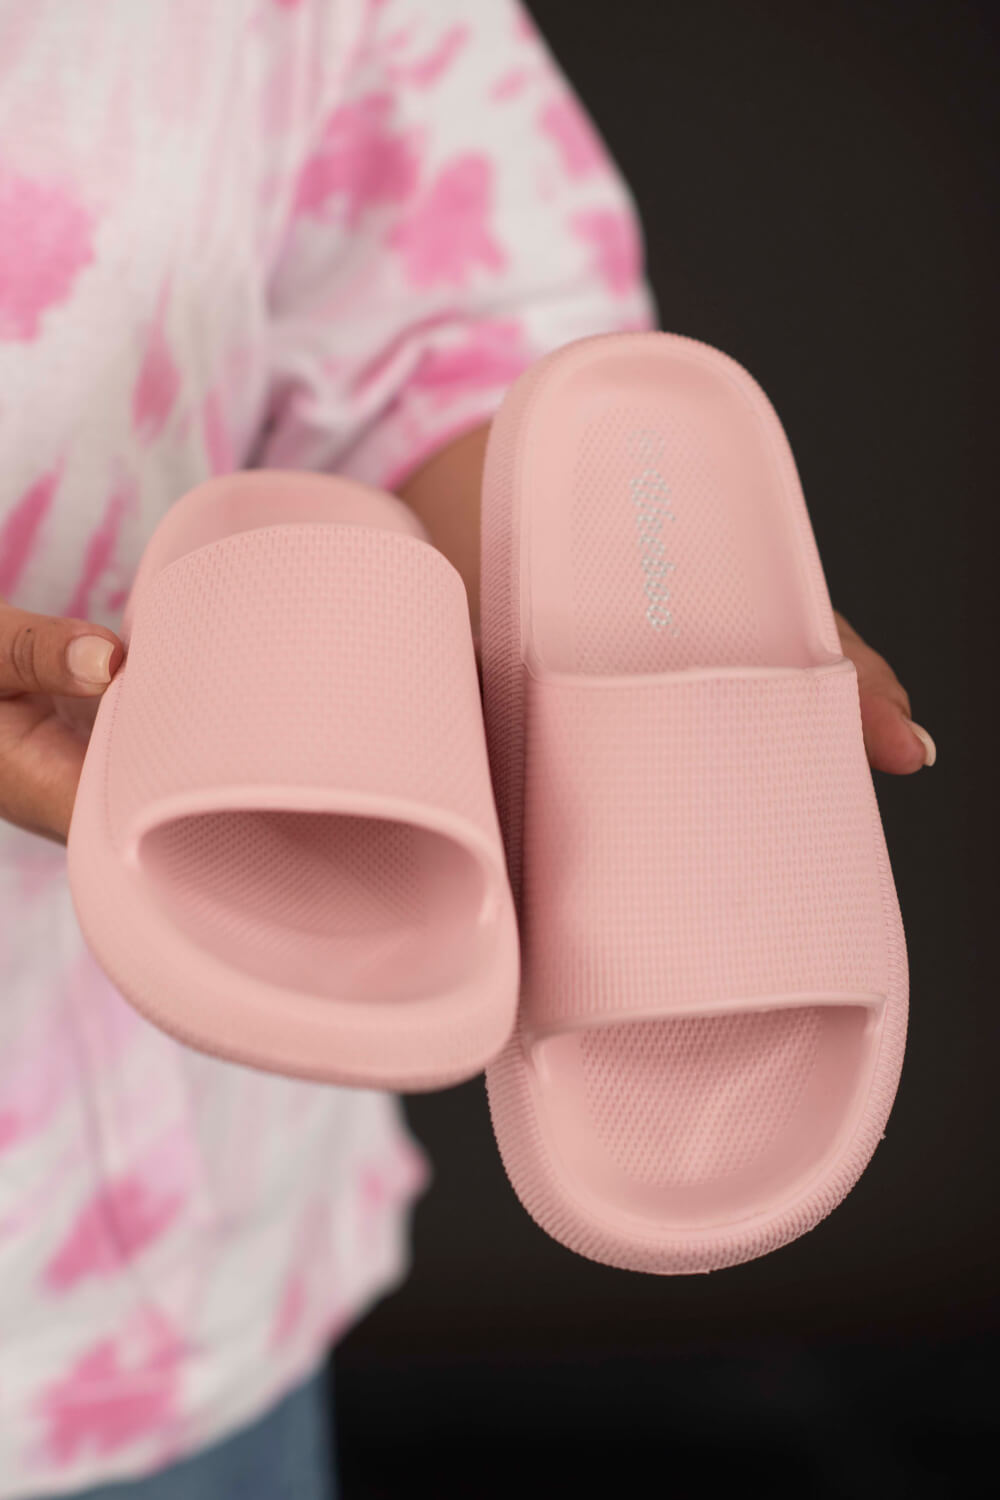 WeeBoo Go All Out Slide-On Sandals in Pink